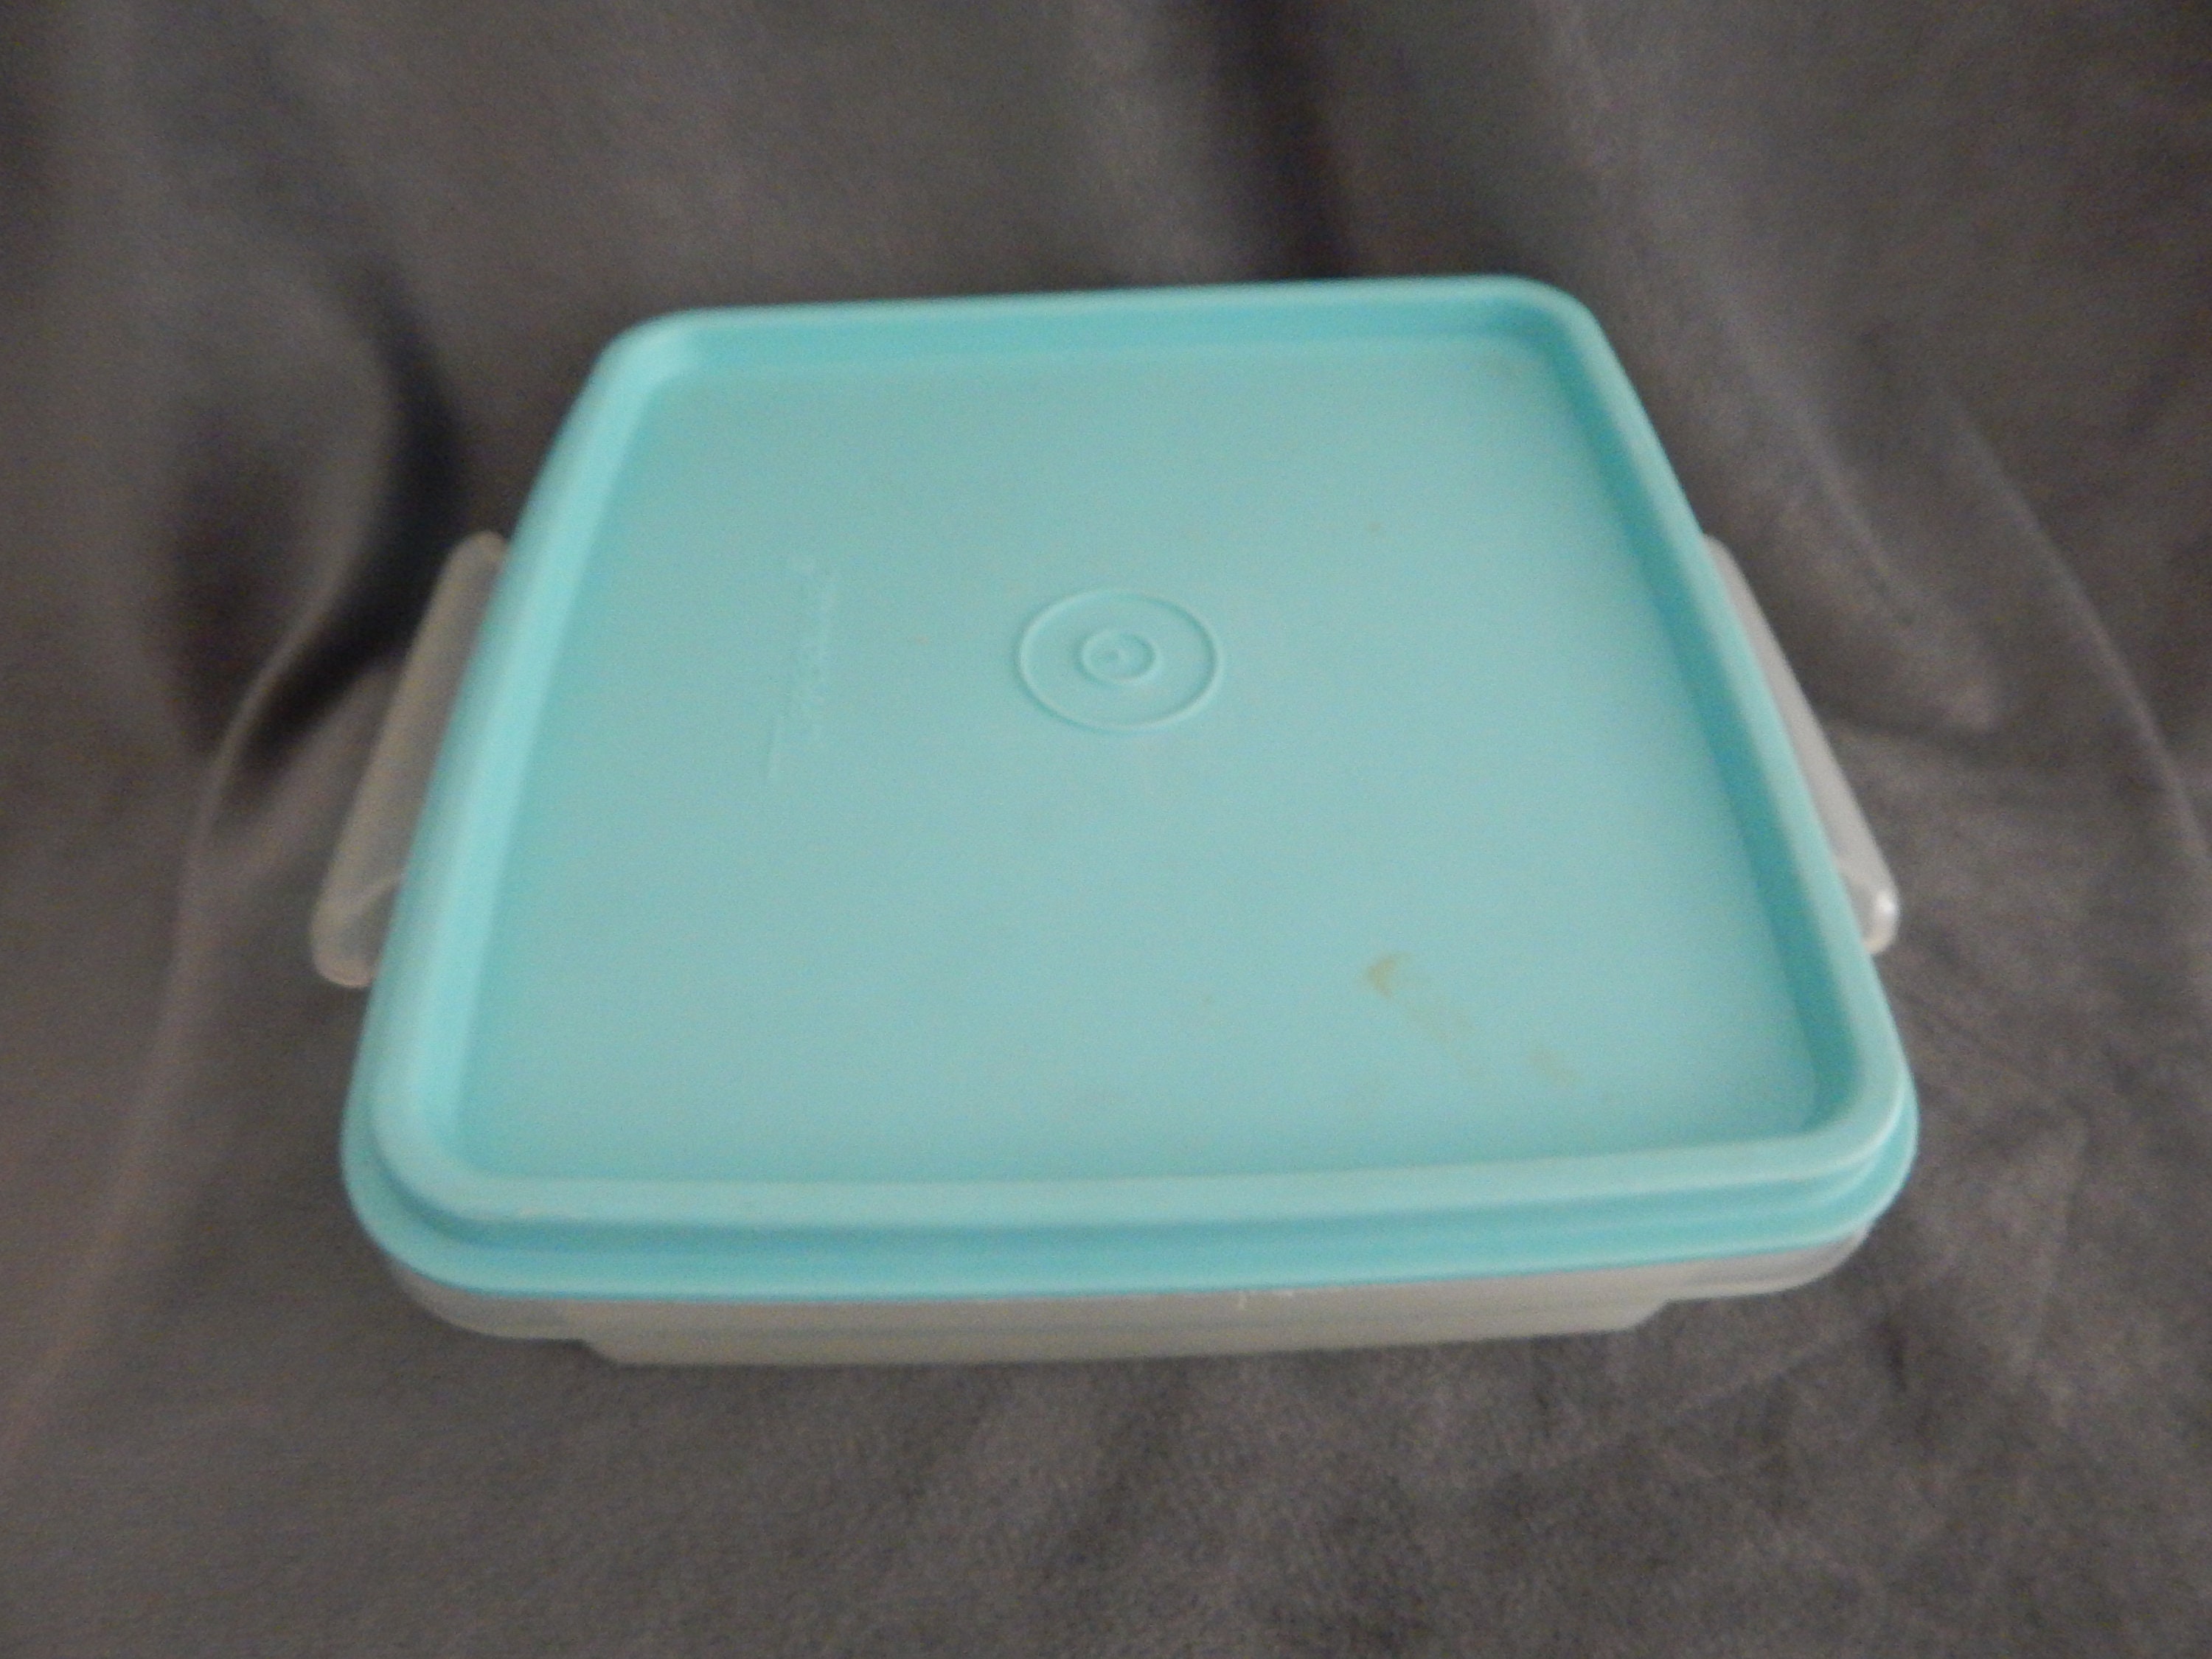 2 Square Rounds, 1 Rectangle, Tupperware Containers, Vintage Pastel  Tupperware, Tupperware Containers 311, 317, 1960s Vintage Tupperware 